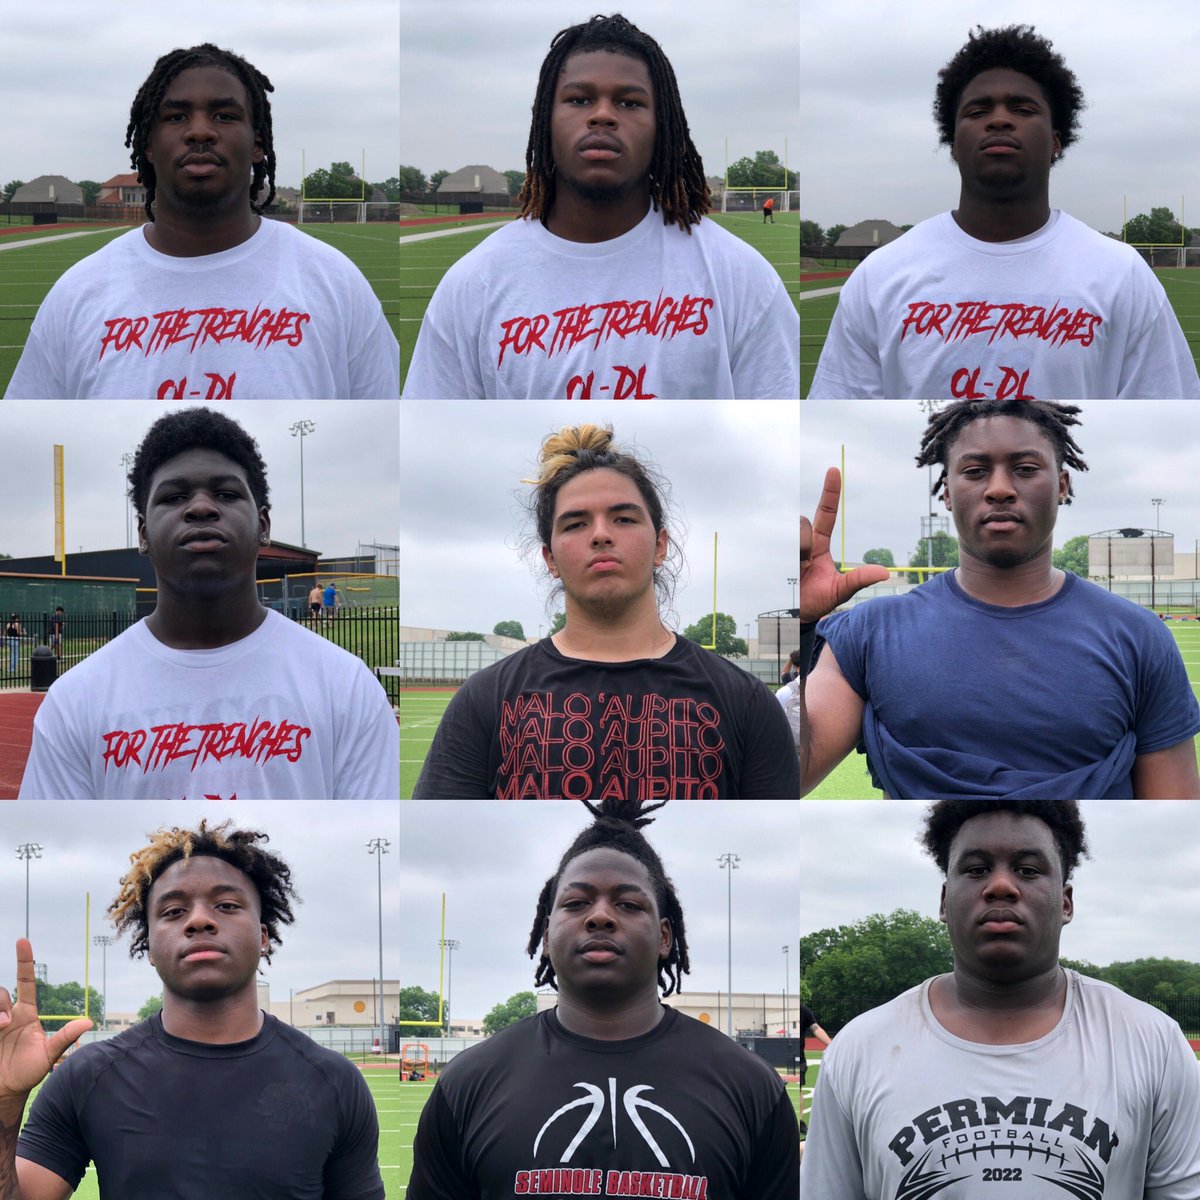 @ZachIsGreat_ #ZachKnowsOL #ForTheTrenches OL/DL Camp #TopTexasProspects DL Standouts @stunna4juju @CameronMelvin26 @jakobeperkins07 @LacorianH @D1byront @TysonONeal11 @KirkMyles_ @Jaydanshaw1 @powell_coffie Names To Know⬇️